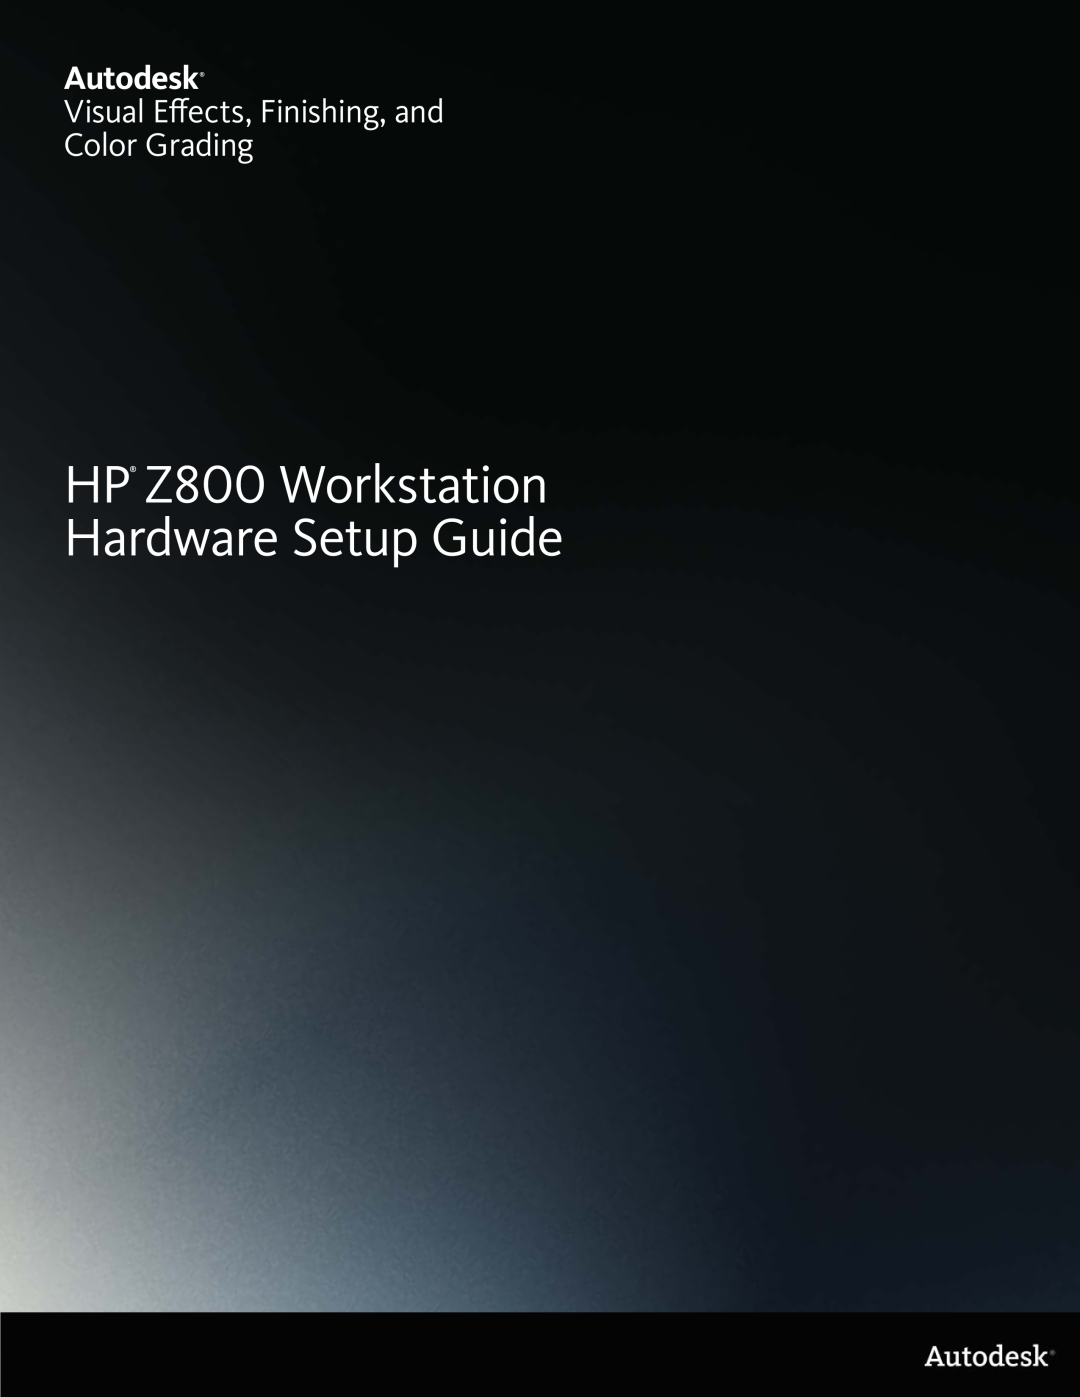 HP manual HP Z800 Workstation Hardware Setup Guide, Autodesk, Visual Eﬀects, Finishing, and Color Grading 